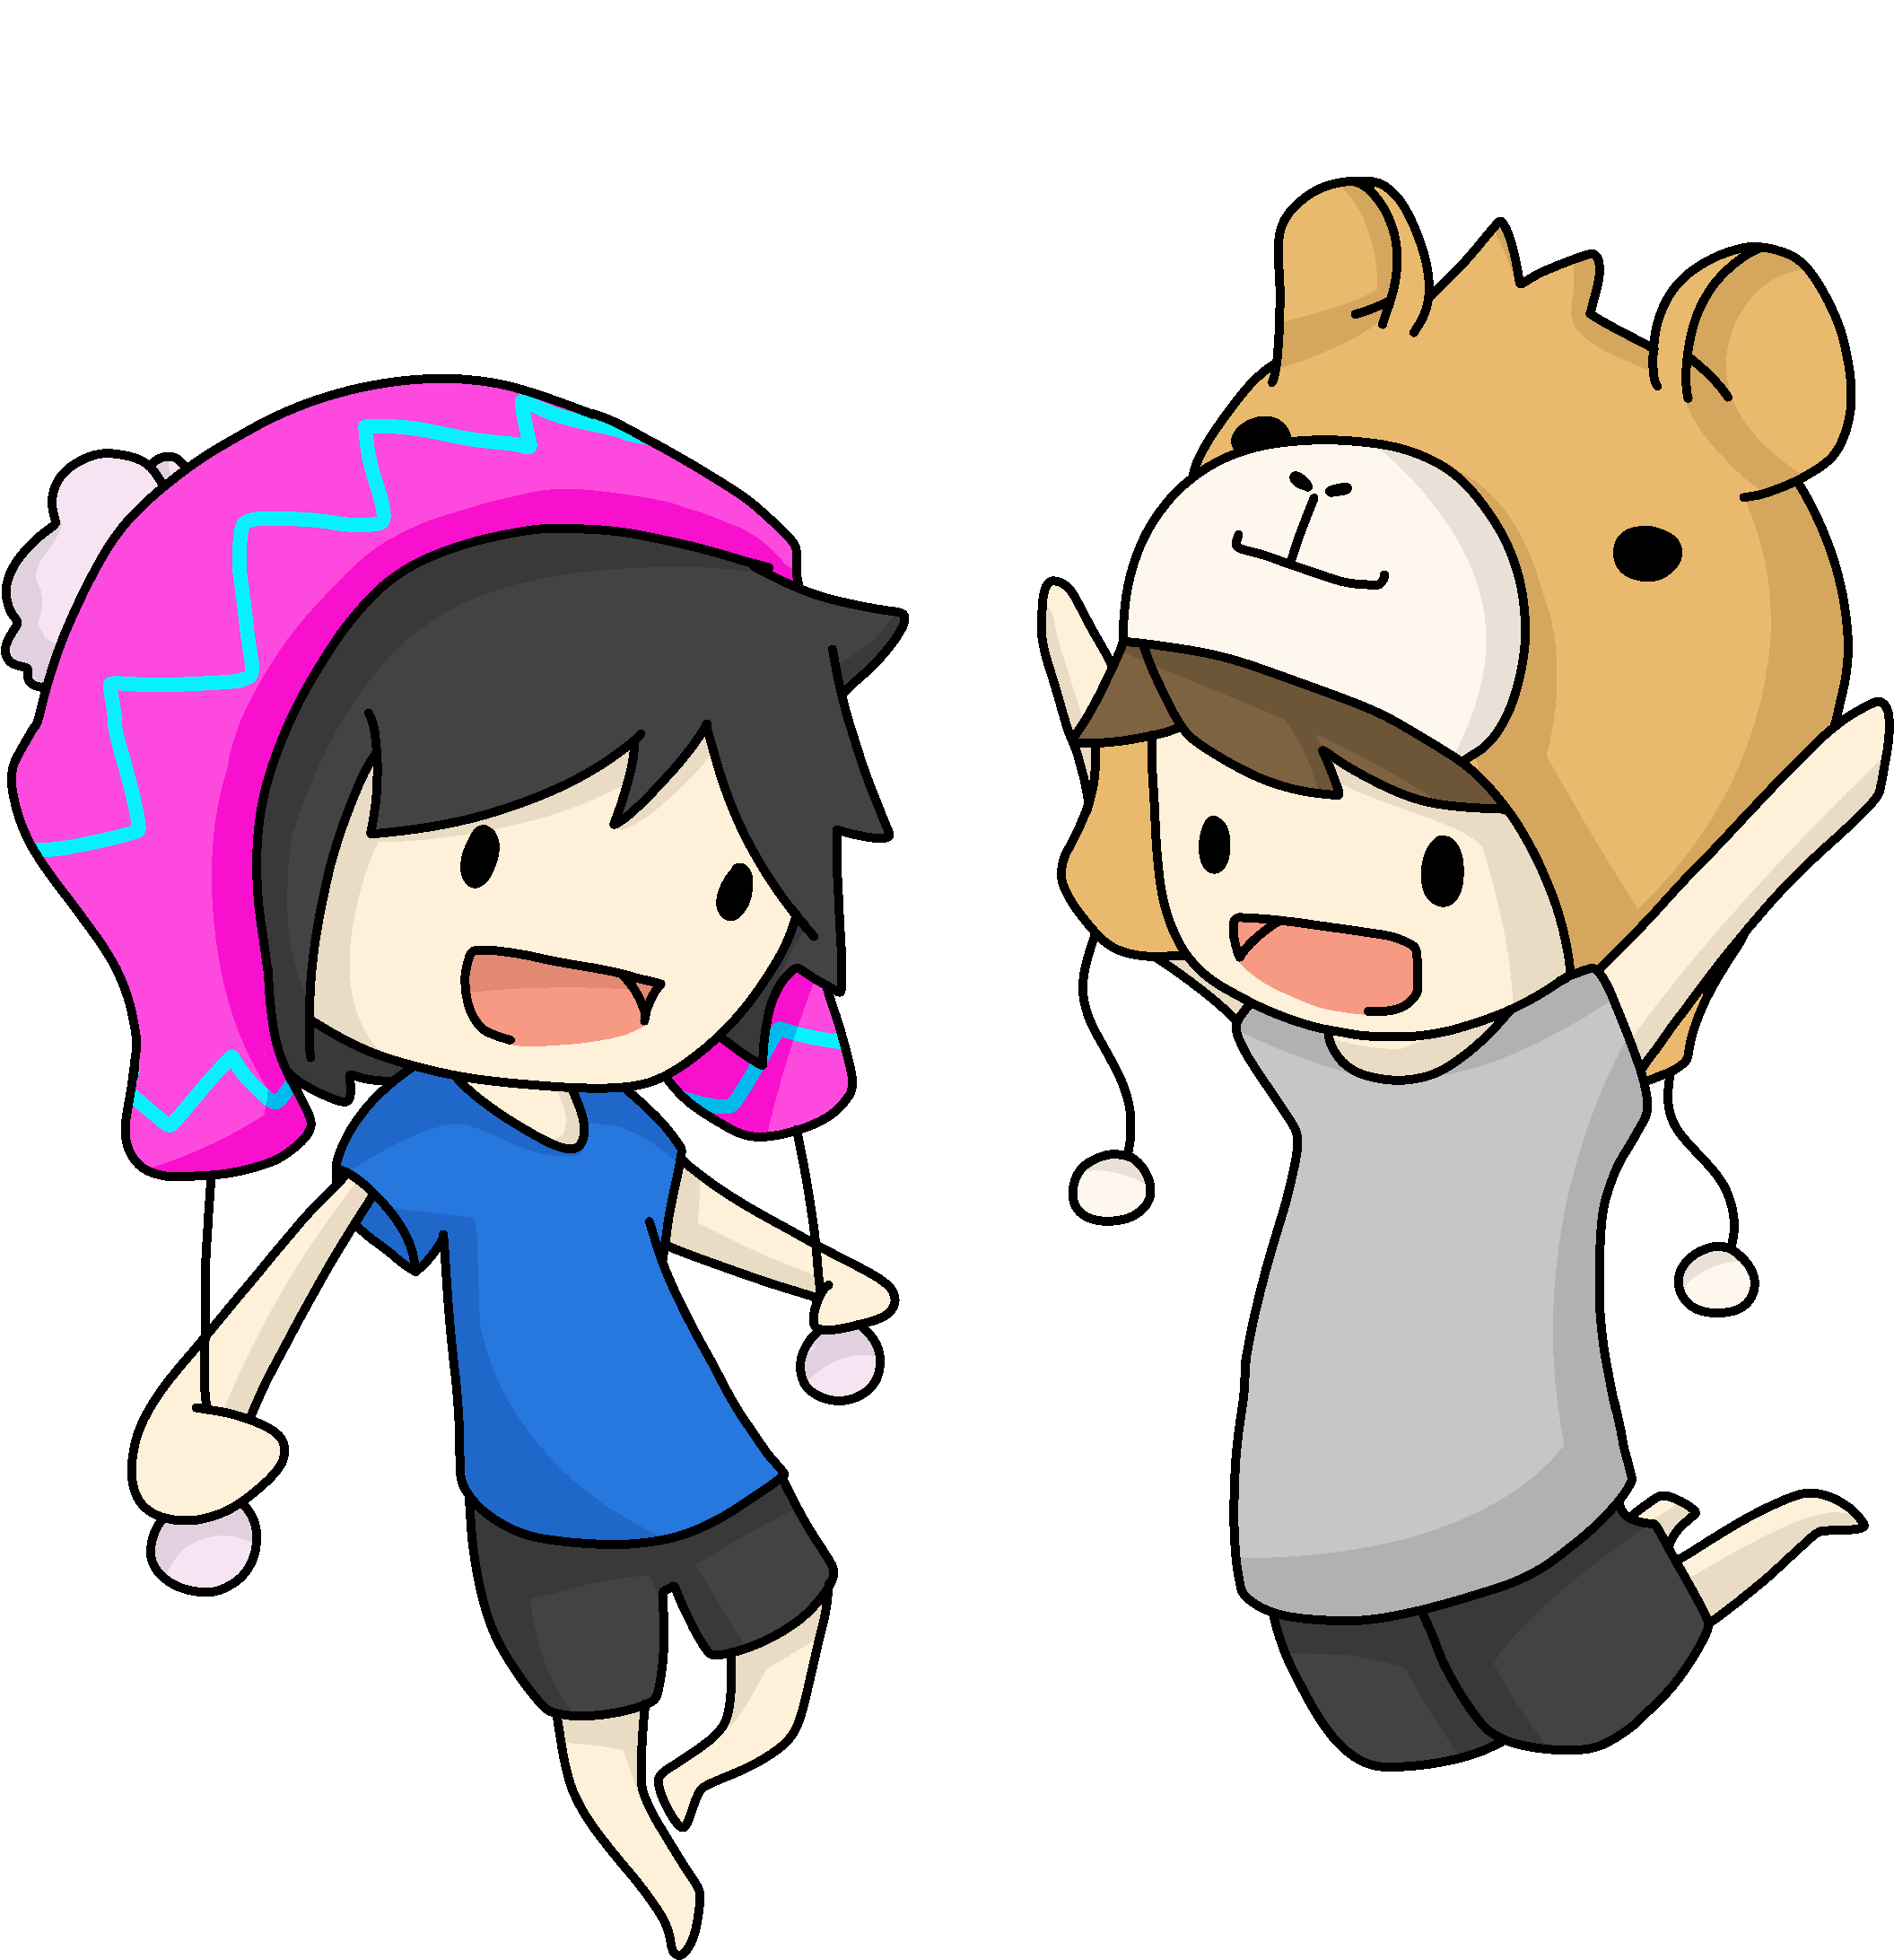 Dan And Phil Drawing Gif Credits To The Owner - Dan And Phil T Shirt (2975x2439)